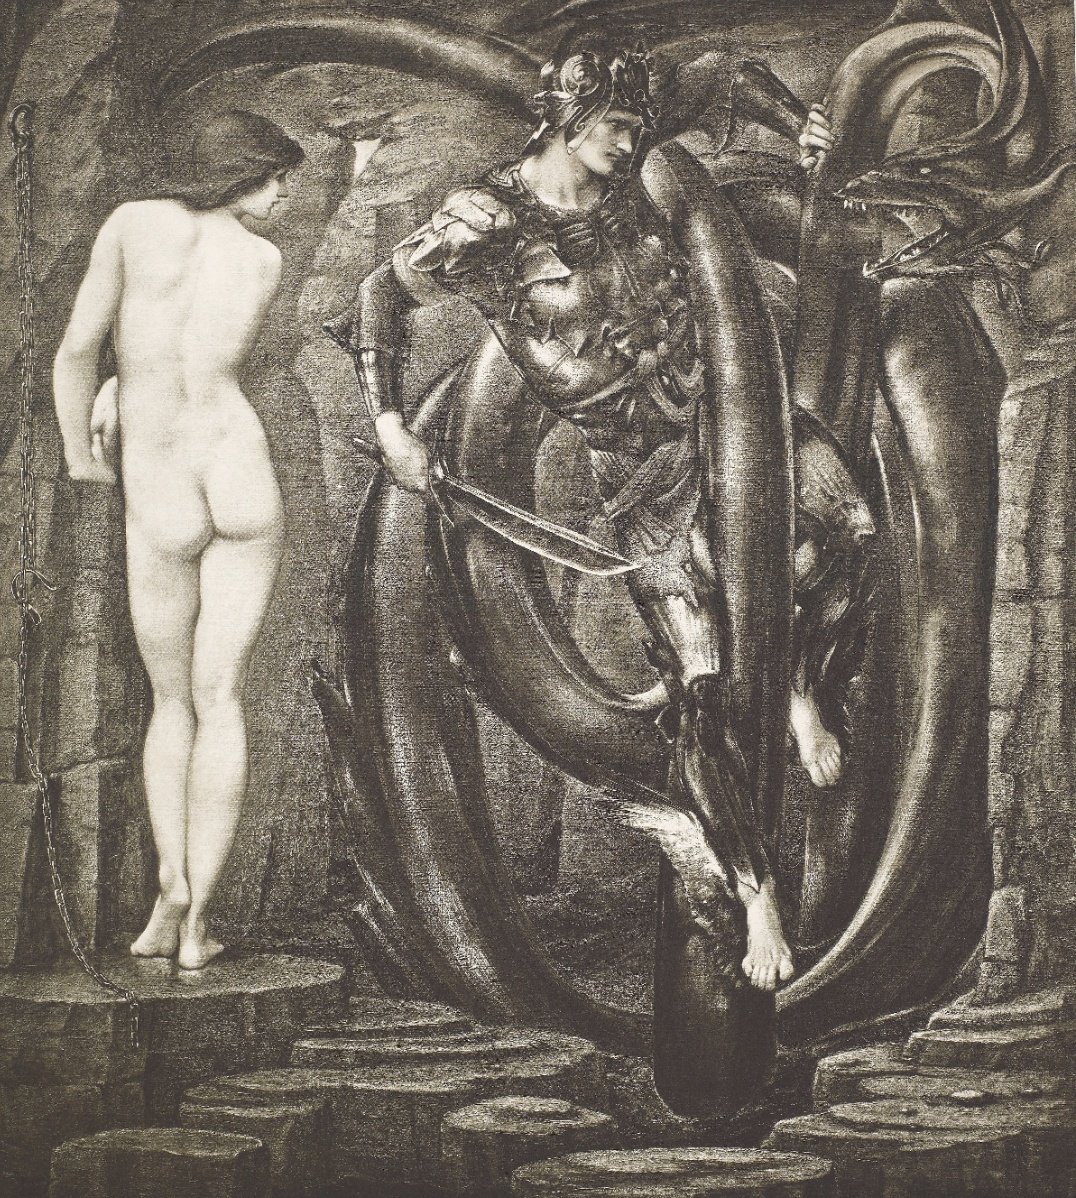 'I know what'll impress her! Wrestling with a seamonster!' 'Mate, I just need help with this knot...' 👍🏛️🍑 #MuseumBums Burne-Jones' Perseus and Andromeda, 1888 from @BMAGimages @BM_AG 😁 This gorgeous image is one of our book chapter title pages 📖 museumbums.com/book/museum-bu…